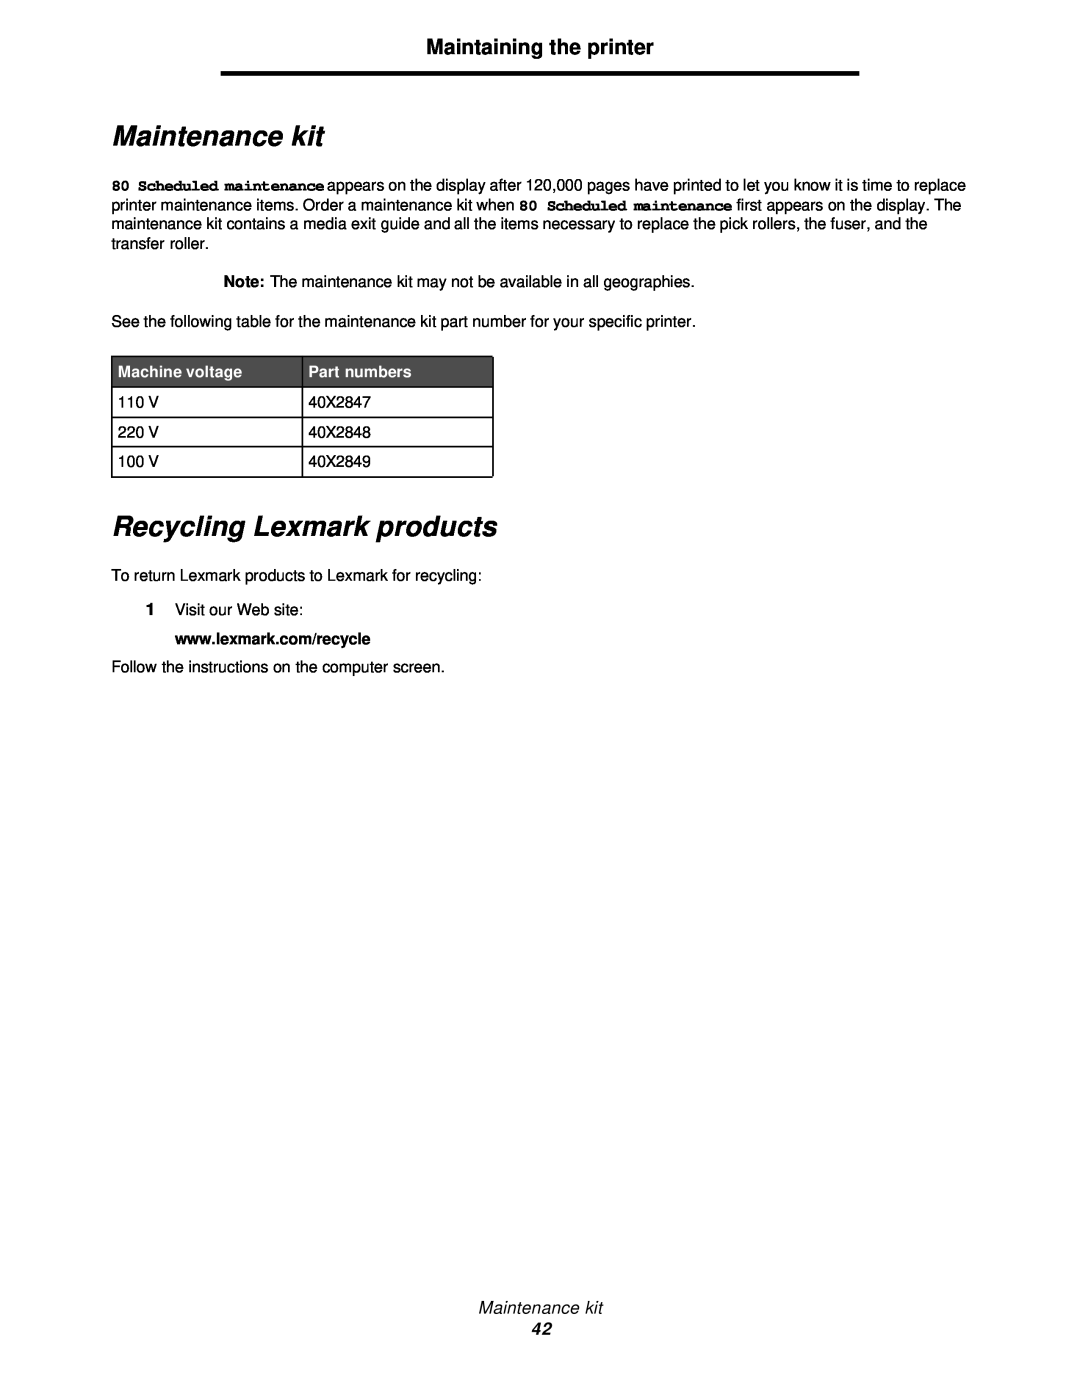 Lexmark 350d manual Maintenance kit, Recycling Lexmark products, Machine voltage, Part numbers, Maintaining the printer 